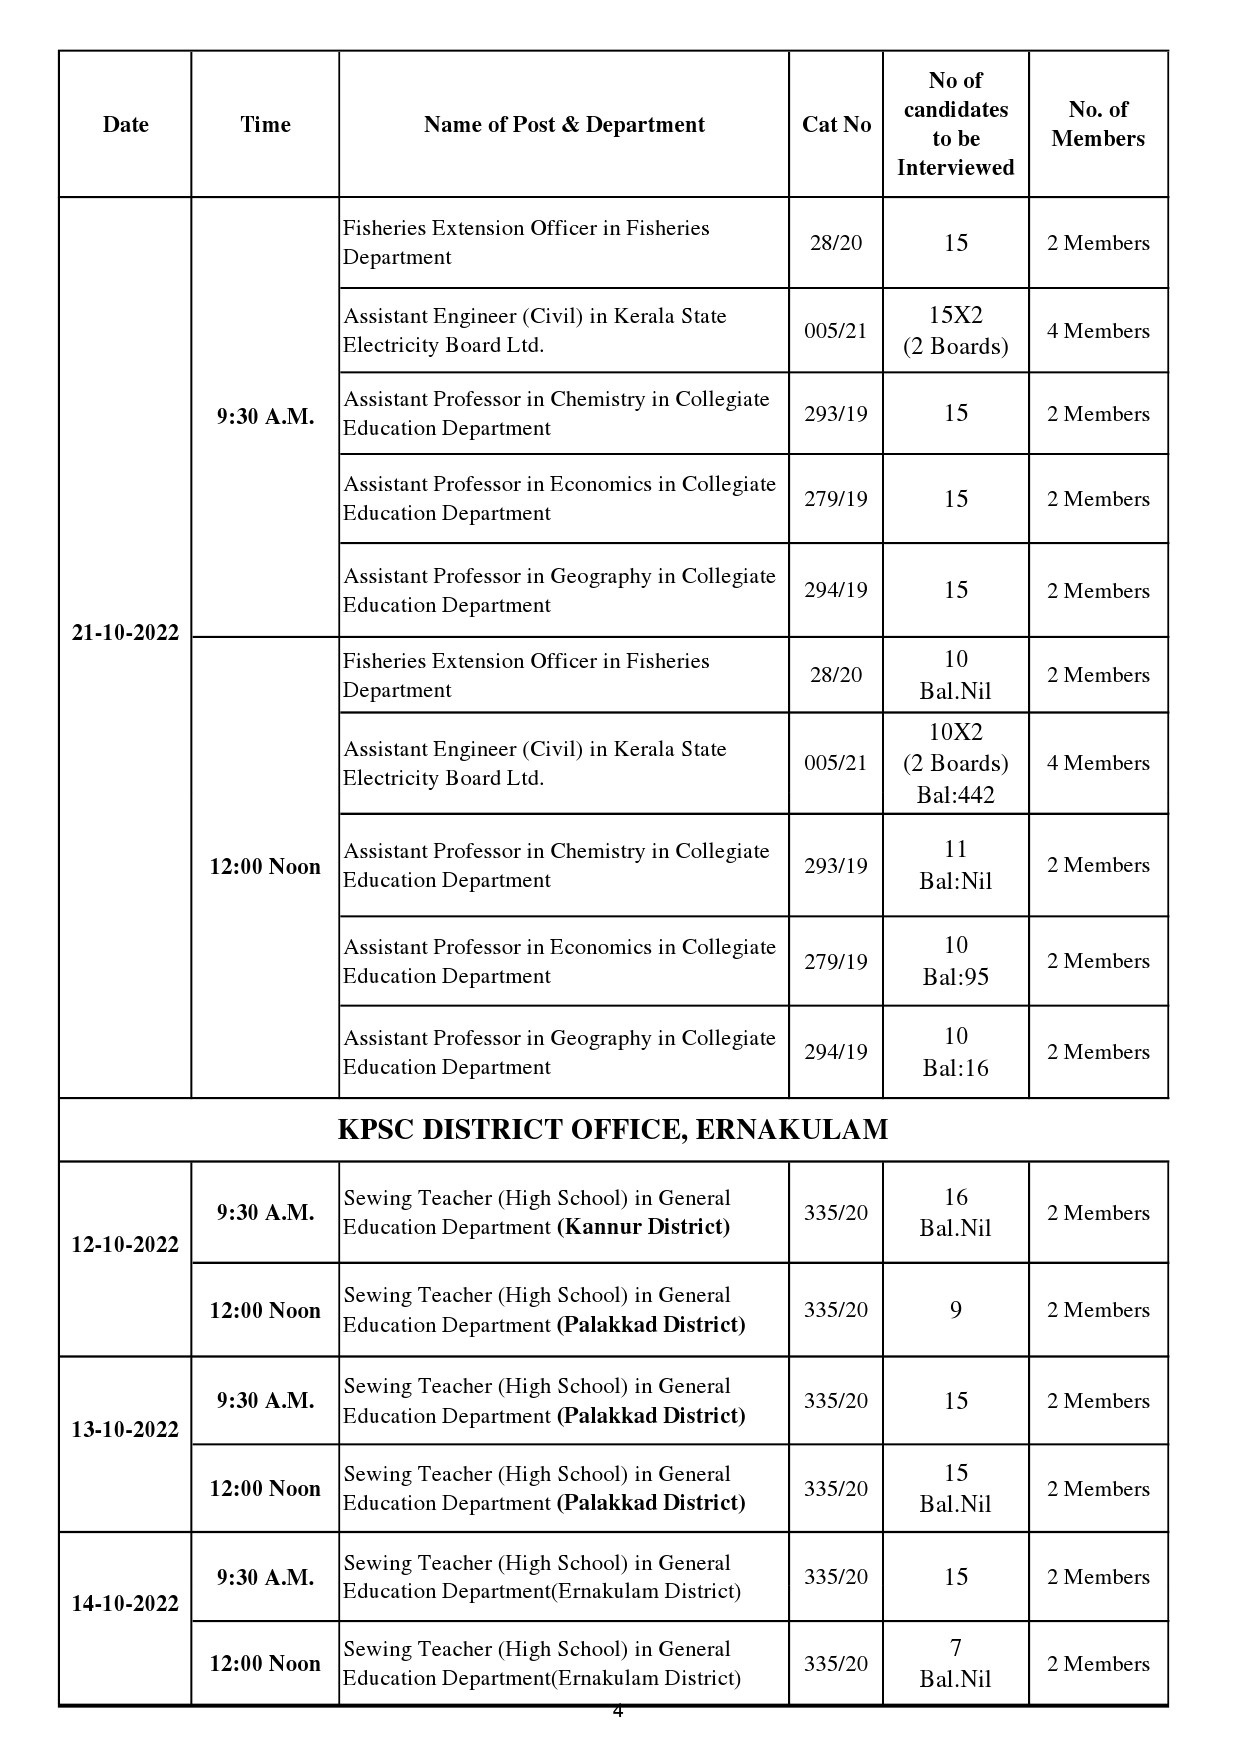 INTERVIEW PROGRAMME FOR THE MONTH OF OCTOBER 2022 - Notification Image 4